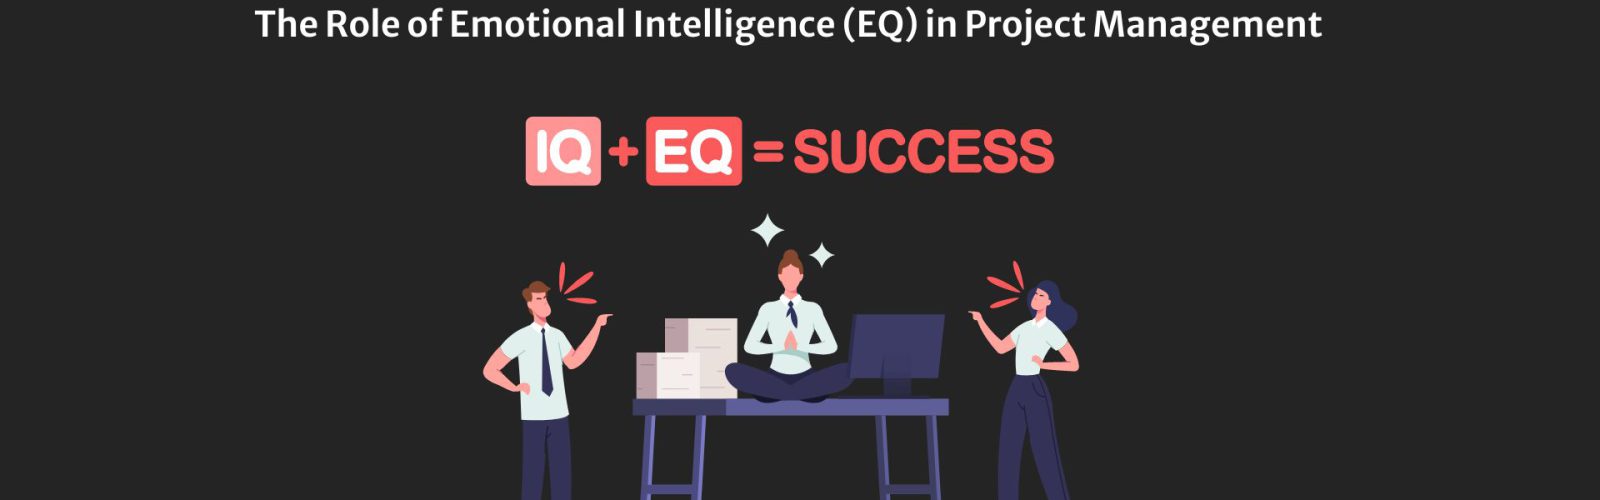 The Role of Emotional Intelligence (EQ) in Project Management